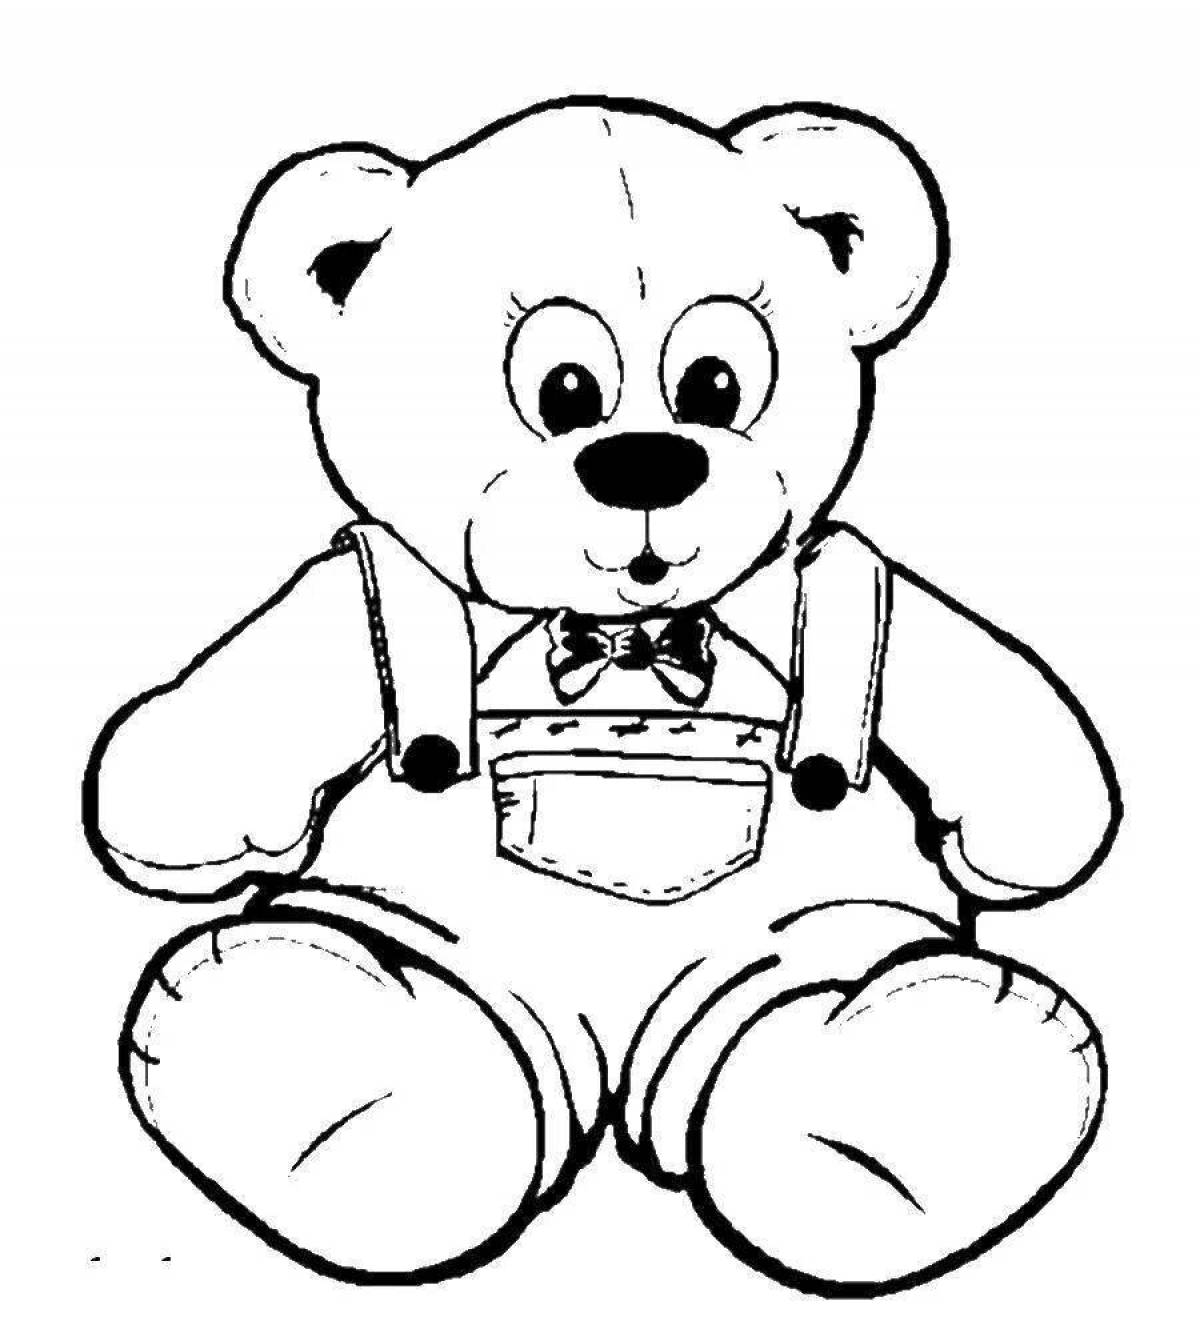 Cute bear cubs coloring pages